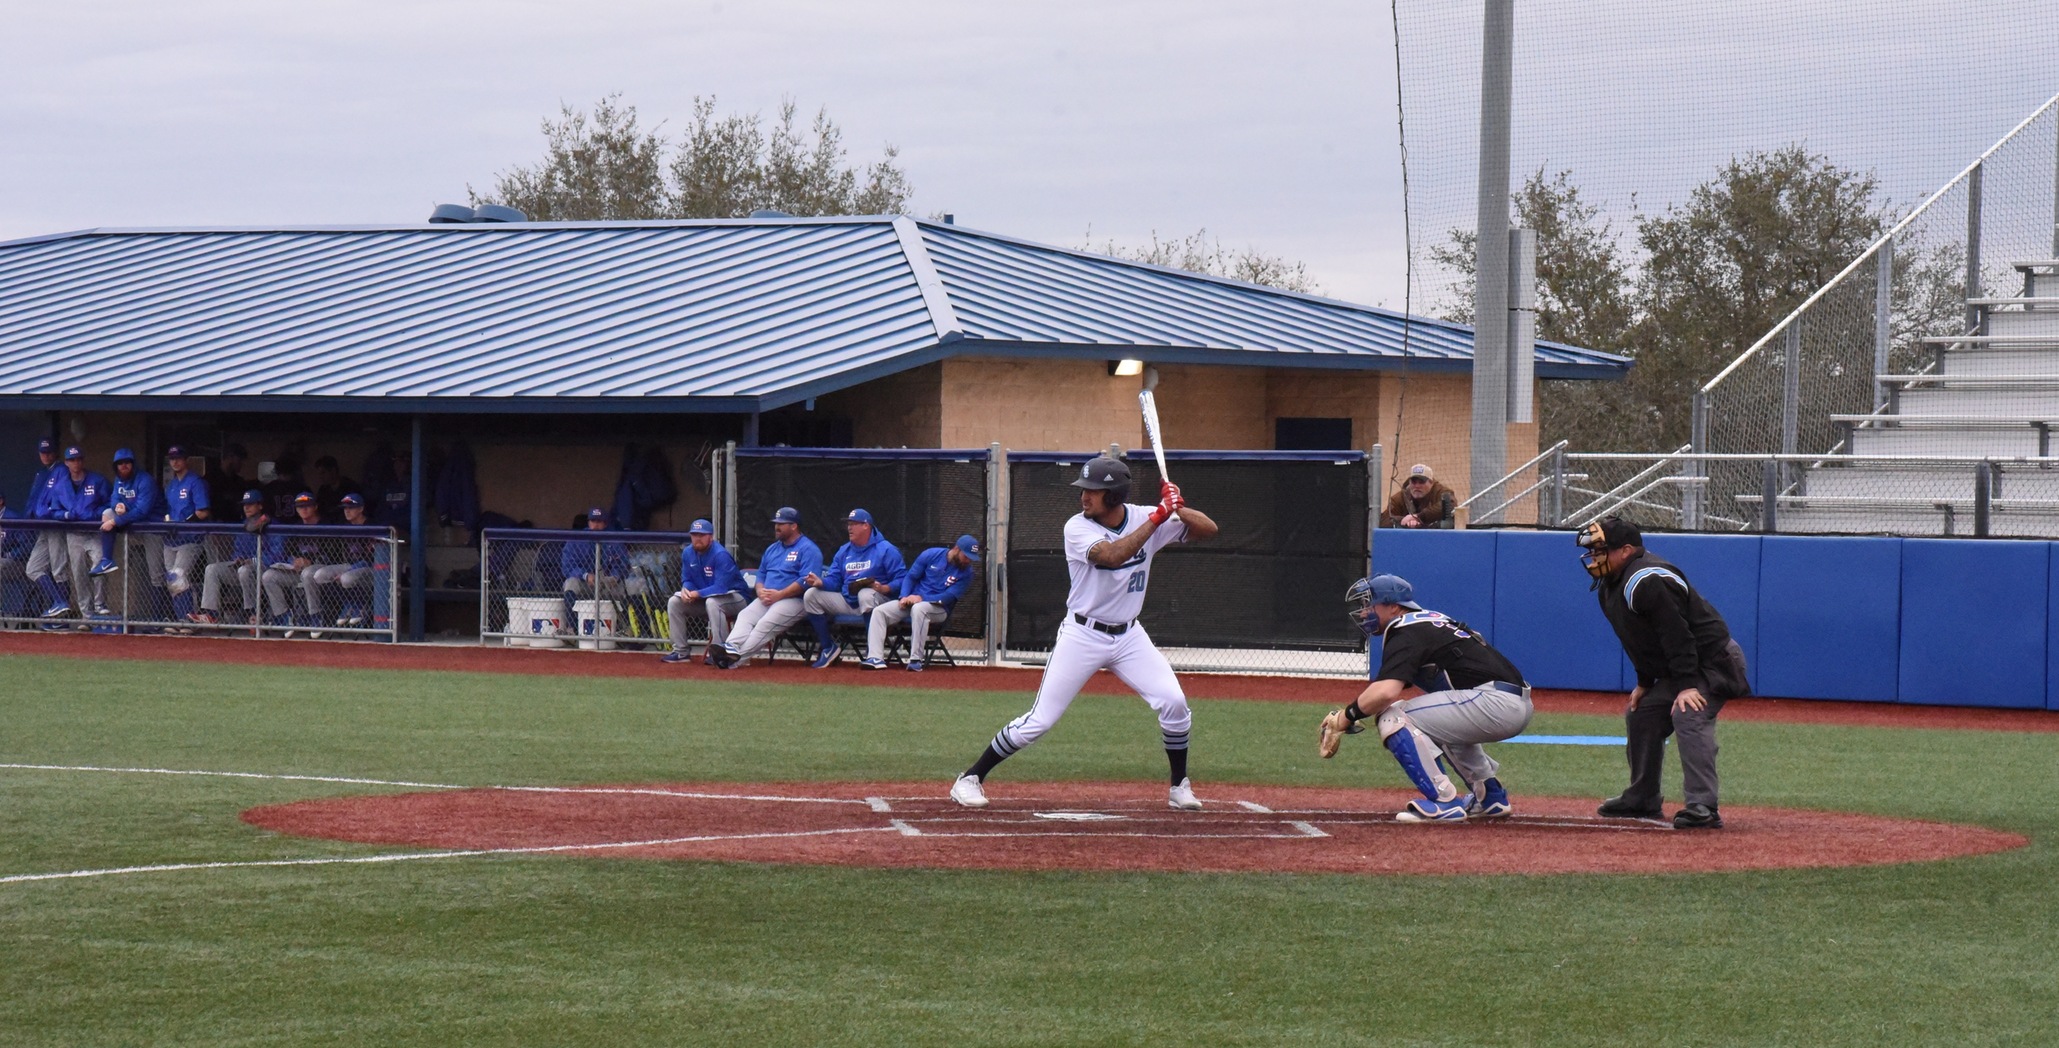 Cougars Take Three Game Series From #7 Ranked Murray State